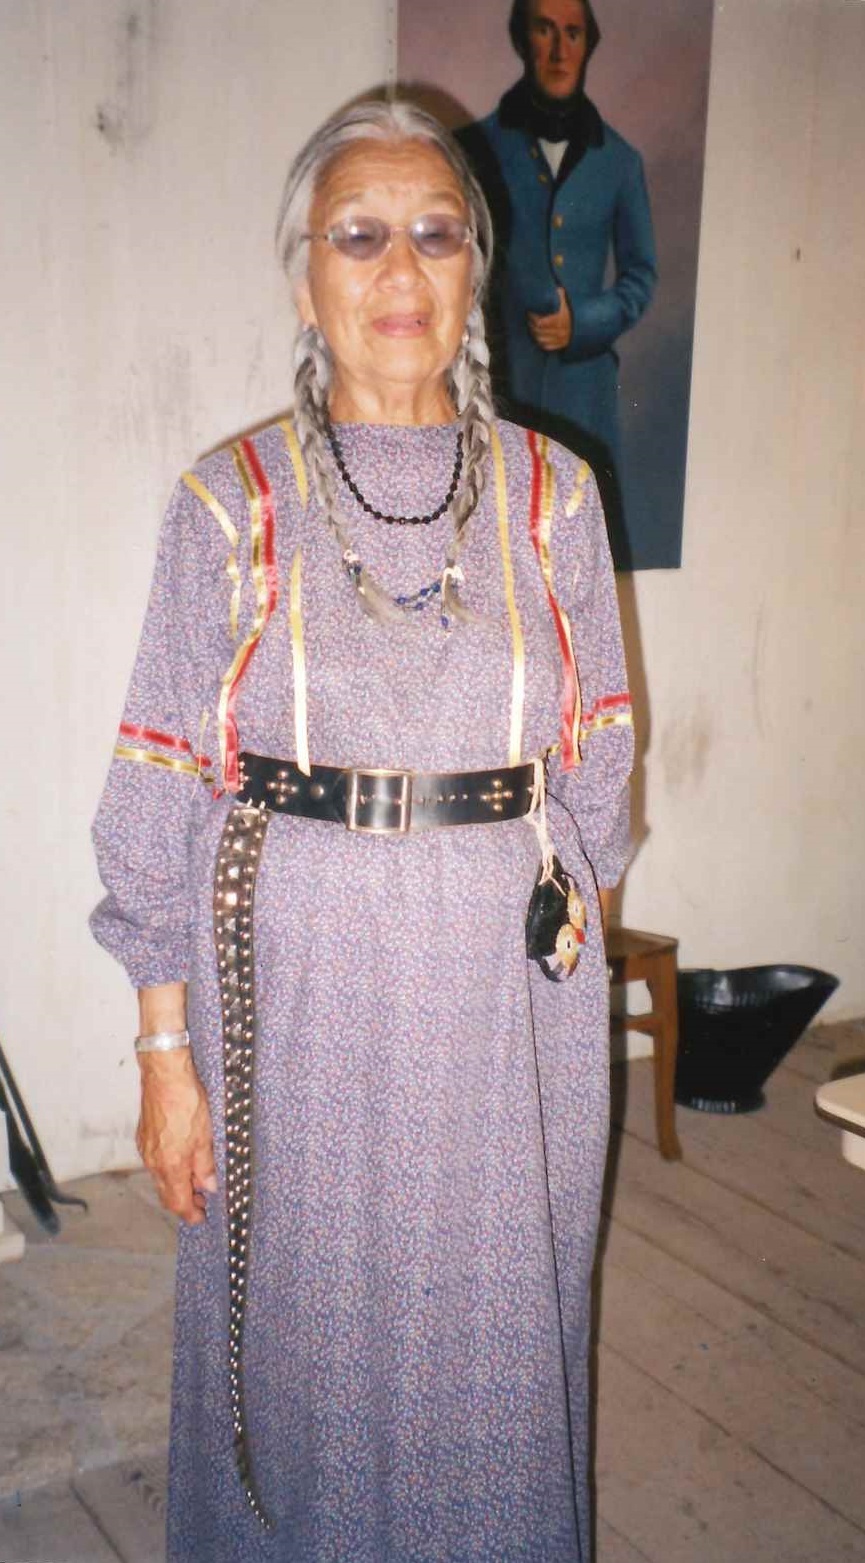 An American Indian woman with gray hair in braids wearing a purple dress with red and gold ribbon decoration